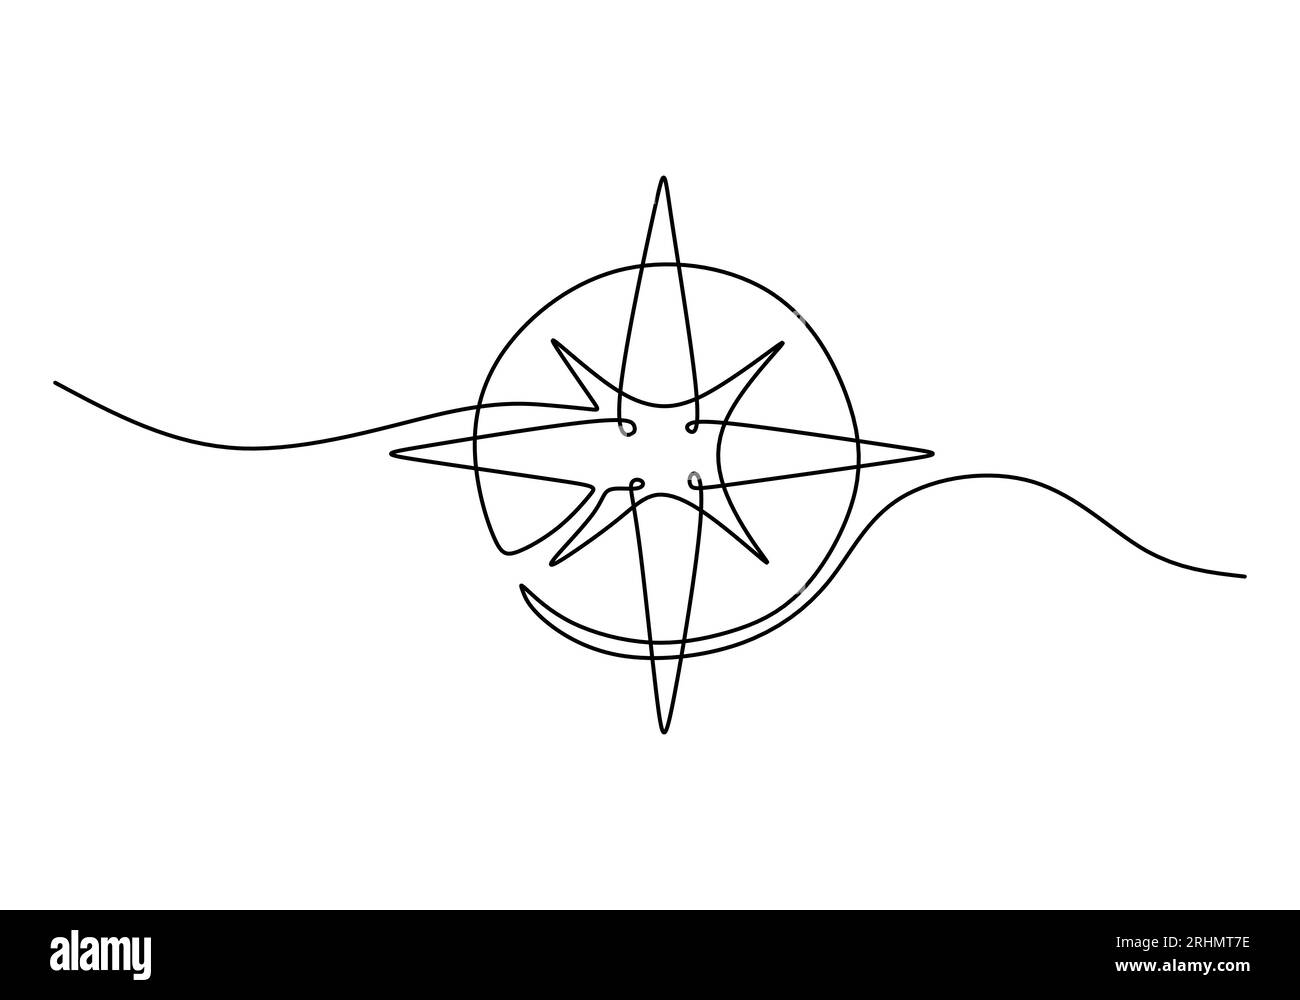 compasses, drawing tool, Stock vector